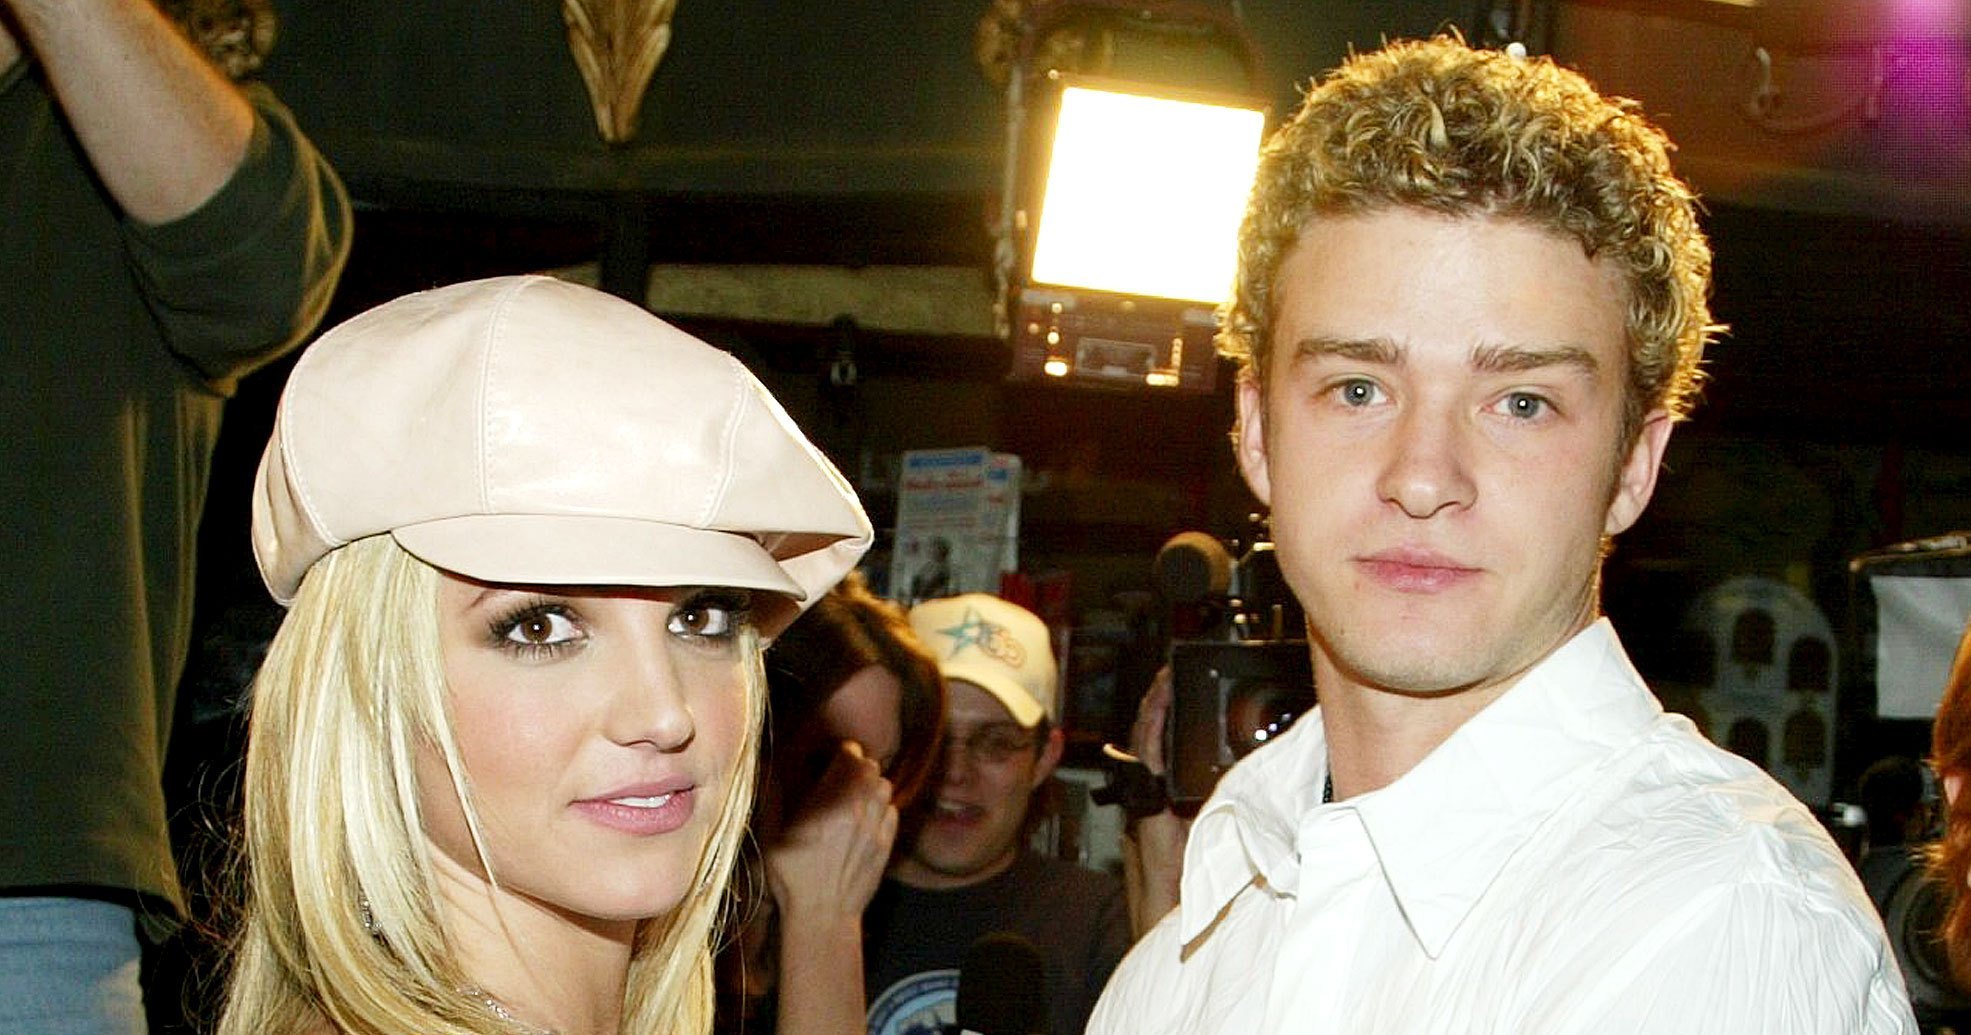 why did jt apologize to britney spears a timeline of their ups and downs